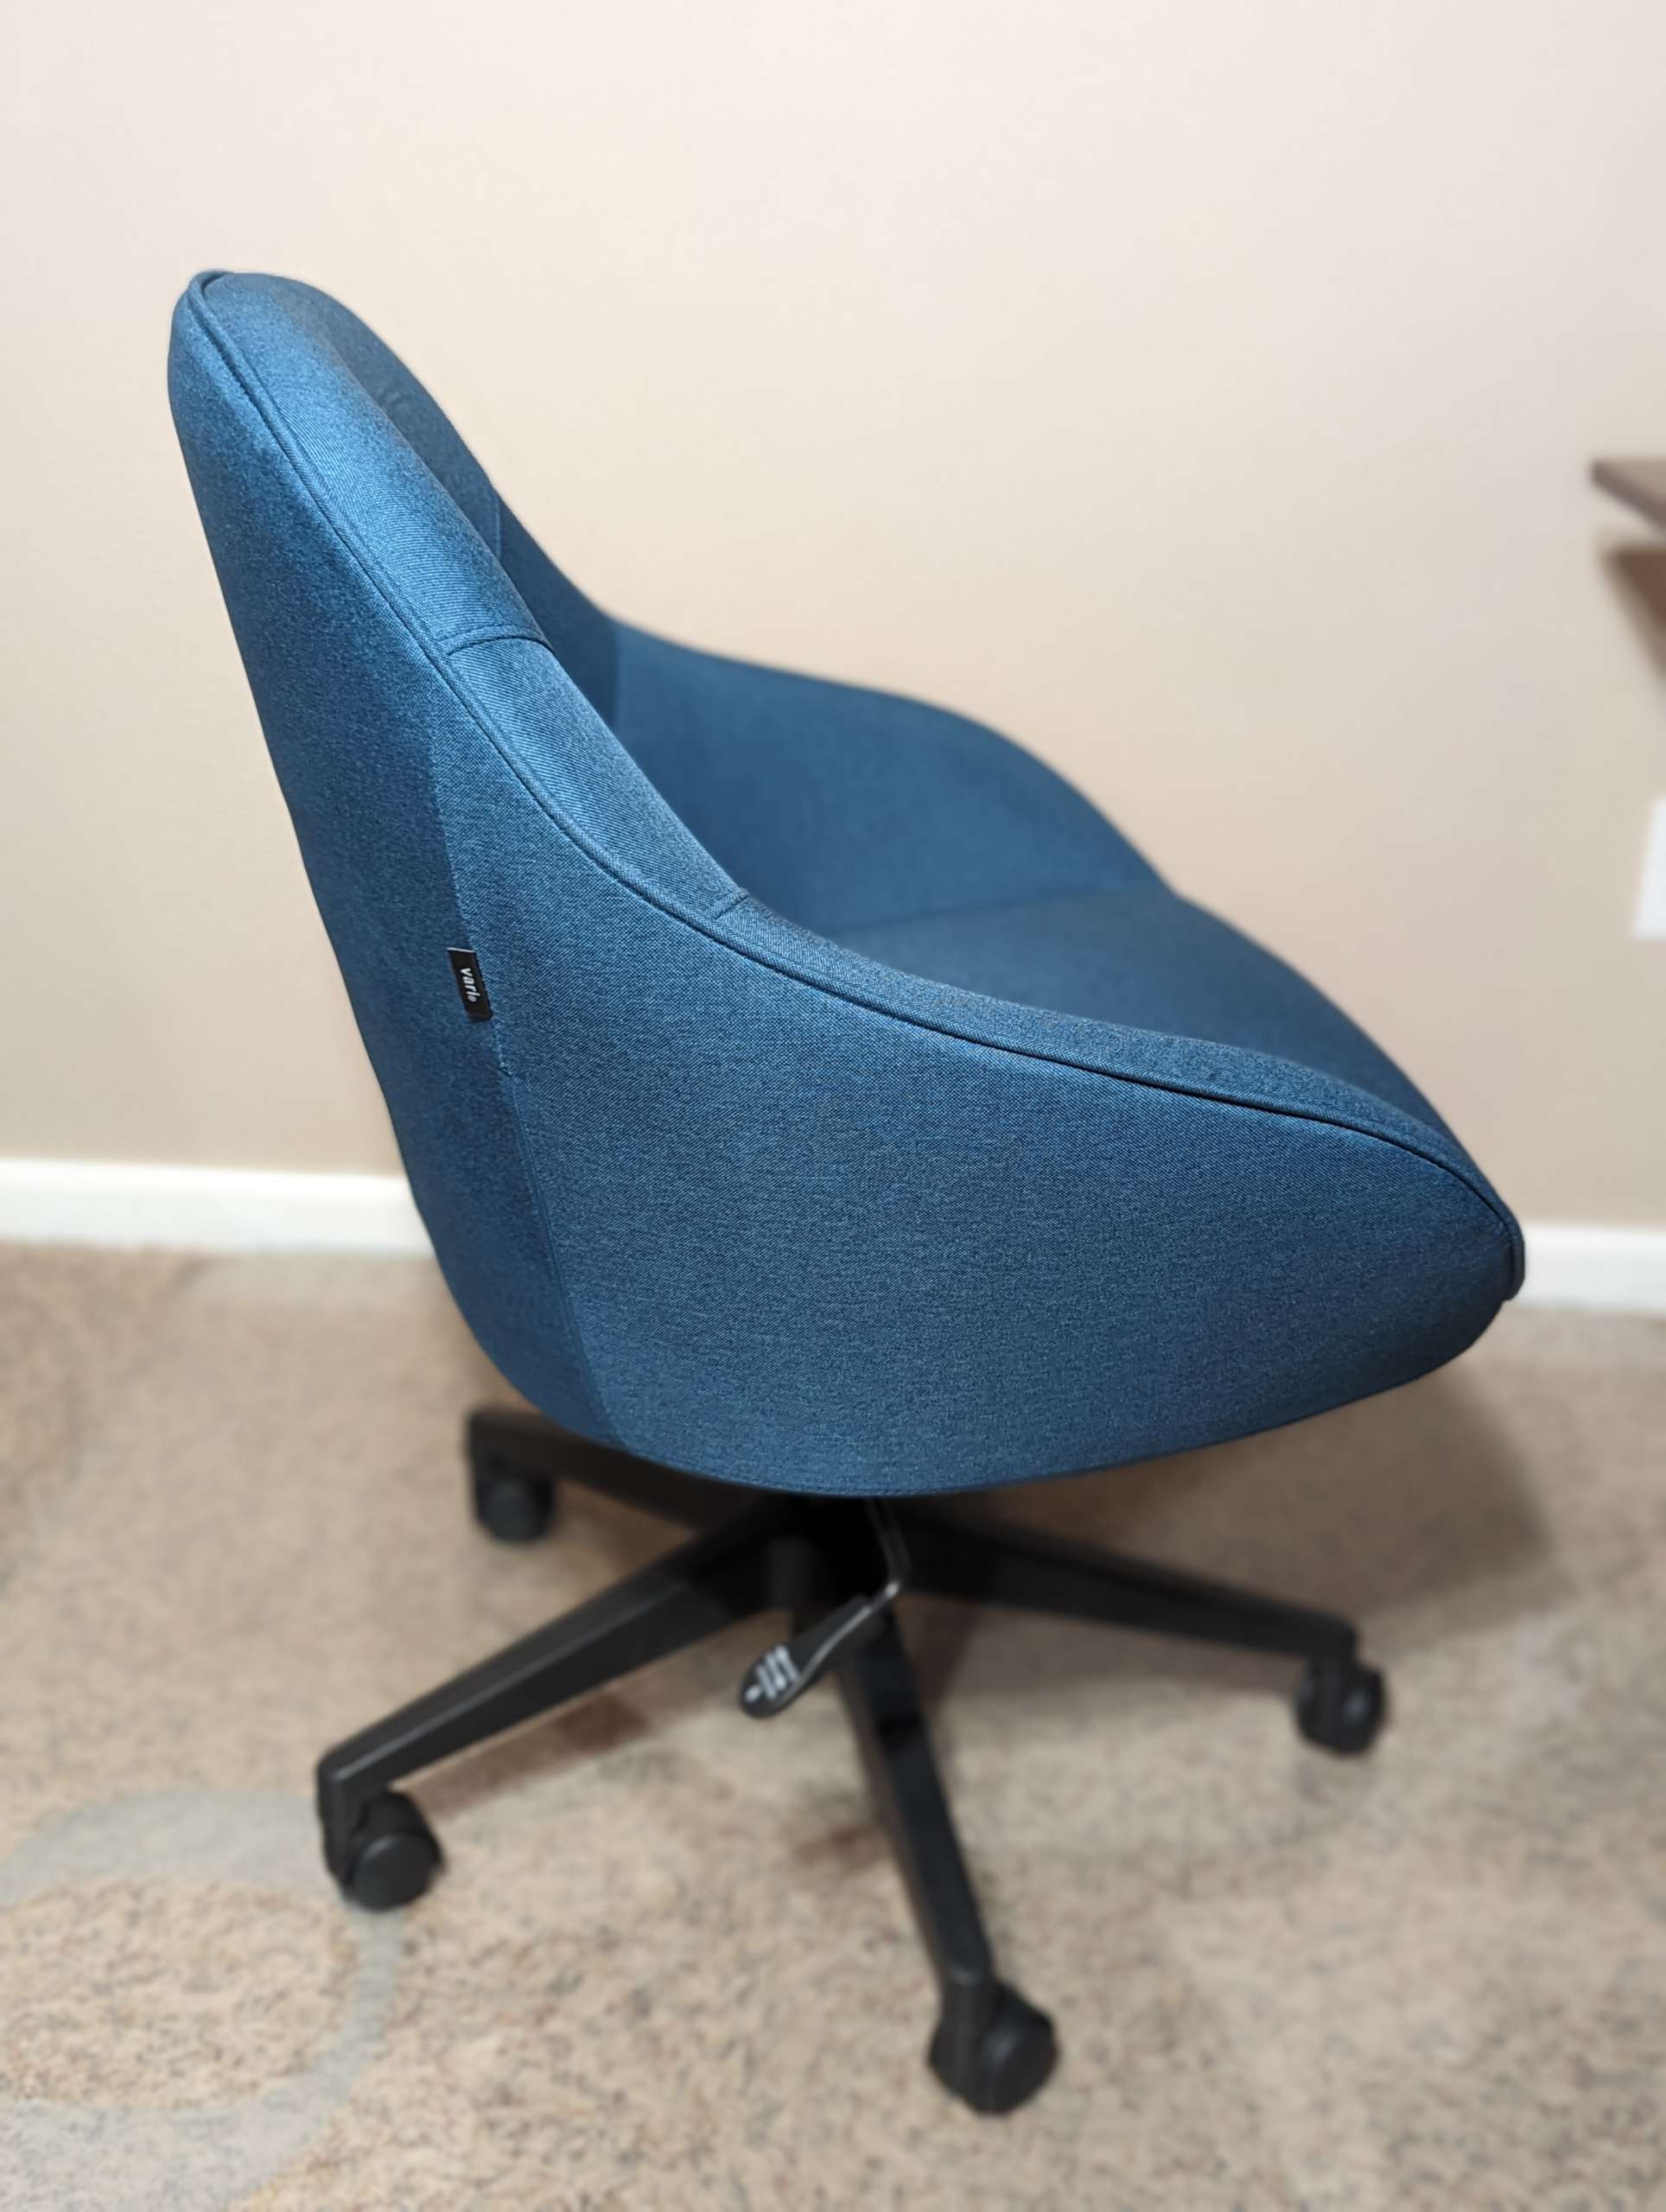 Vari Upholstered Desk Chair (VariDesk) - Comfortable Computer Chair with  Memory Foam Cushion - Home Office Chair with Wheels - Adjustable Height